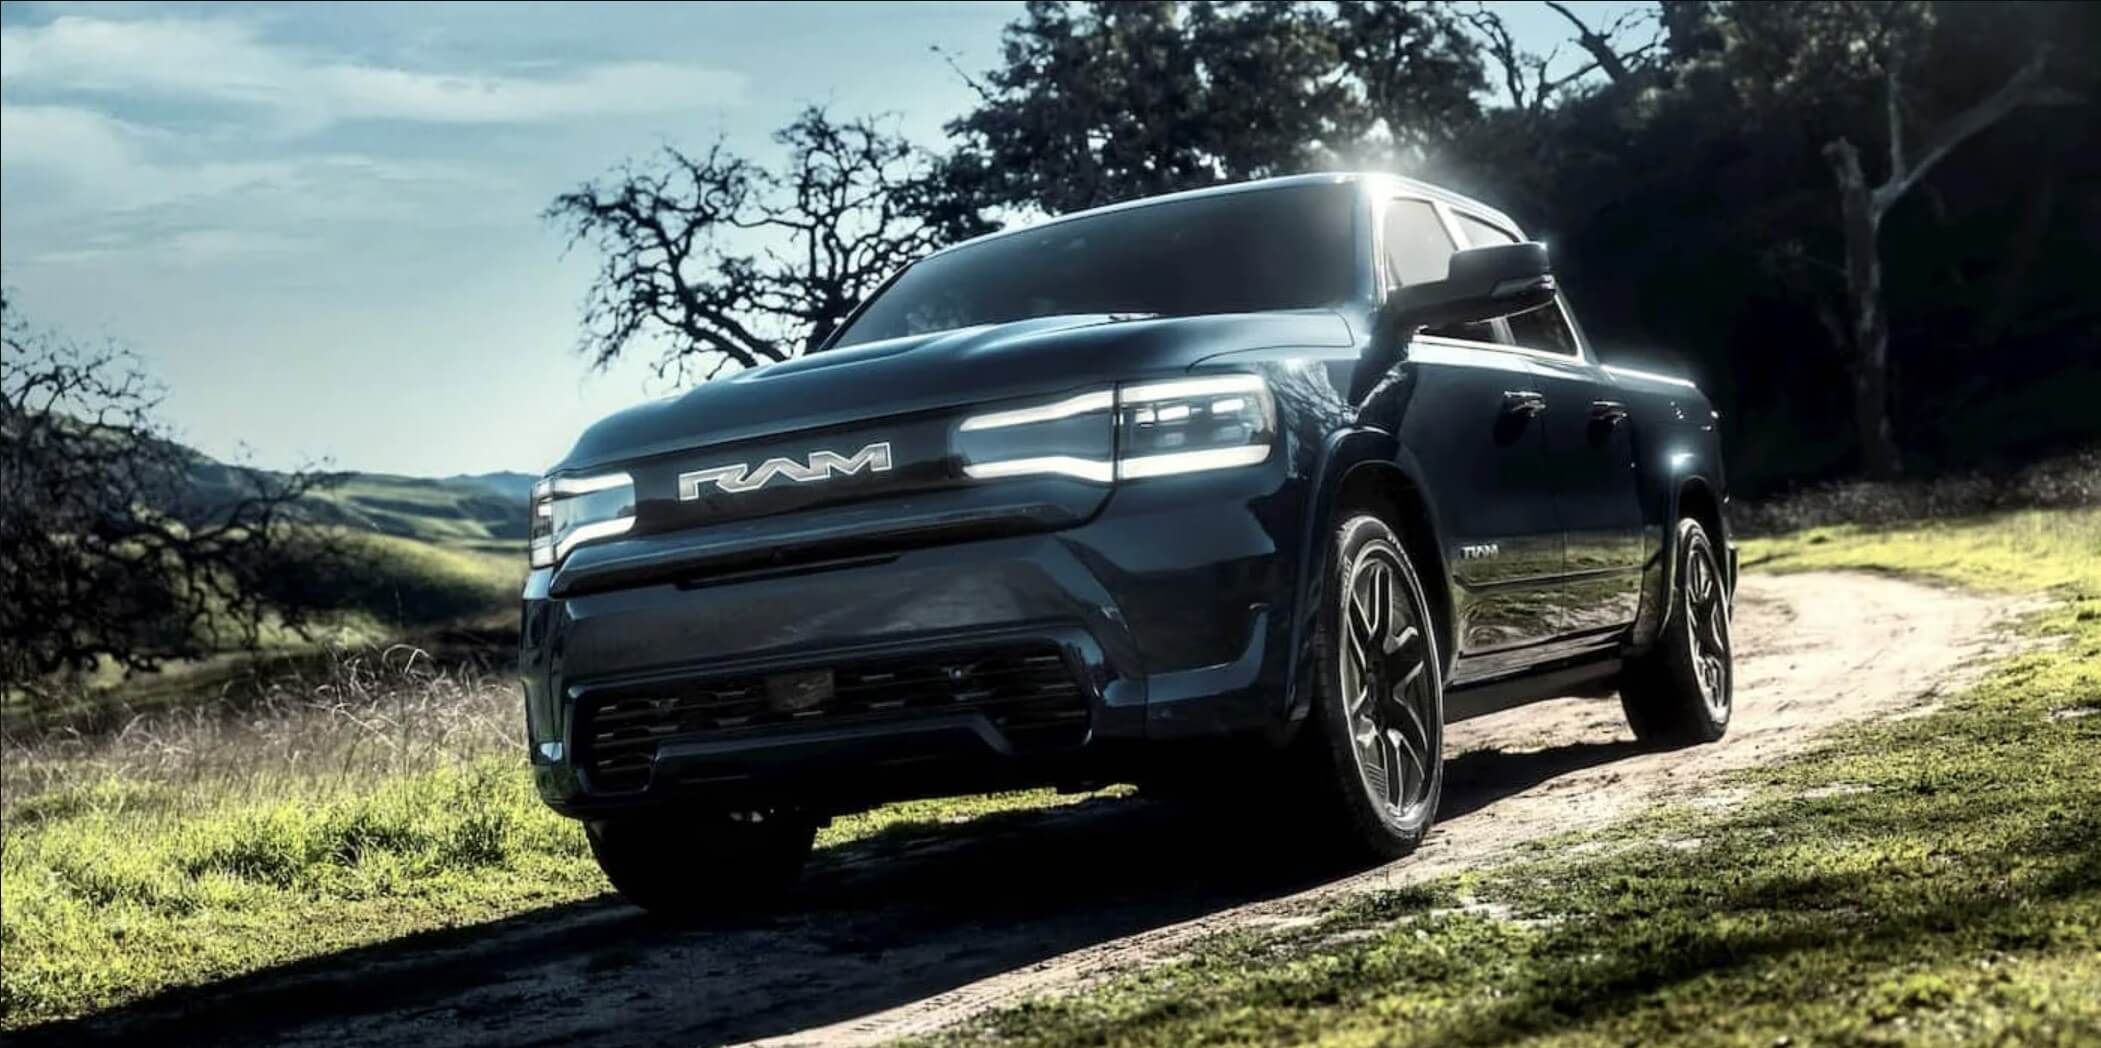 The 2025 Ram 1500 REV driving on a dirt road